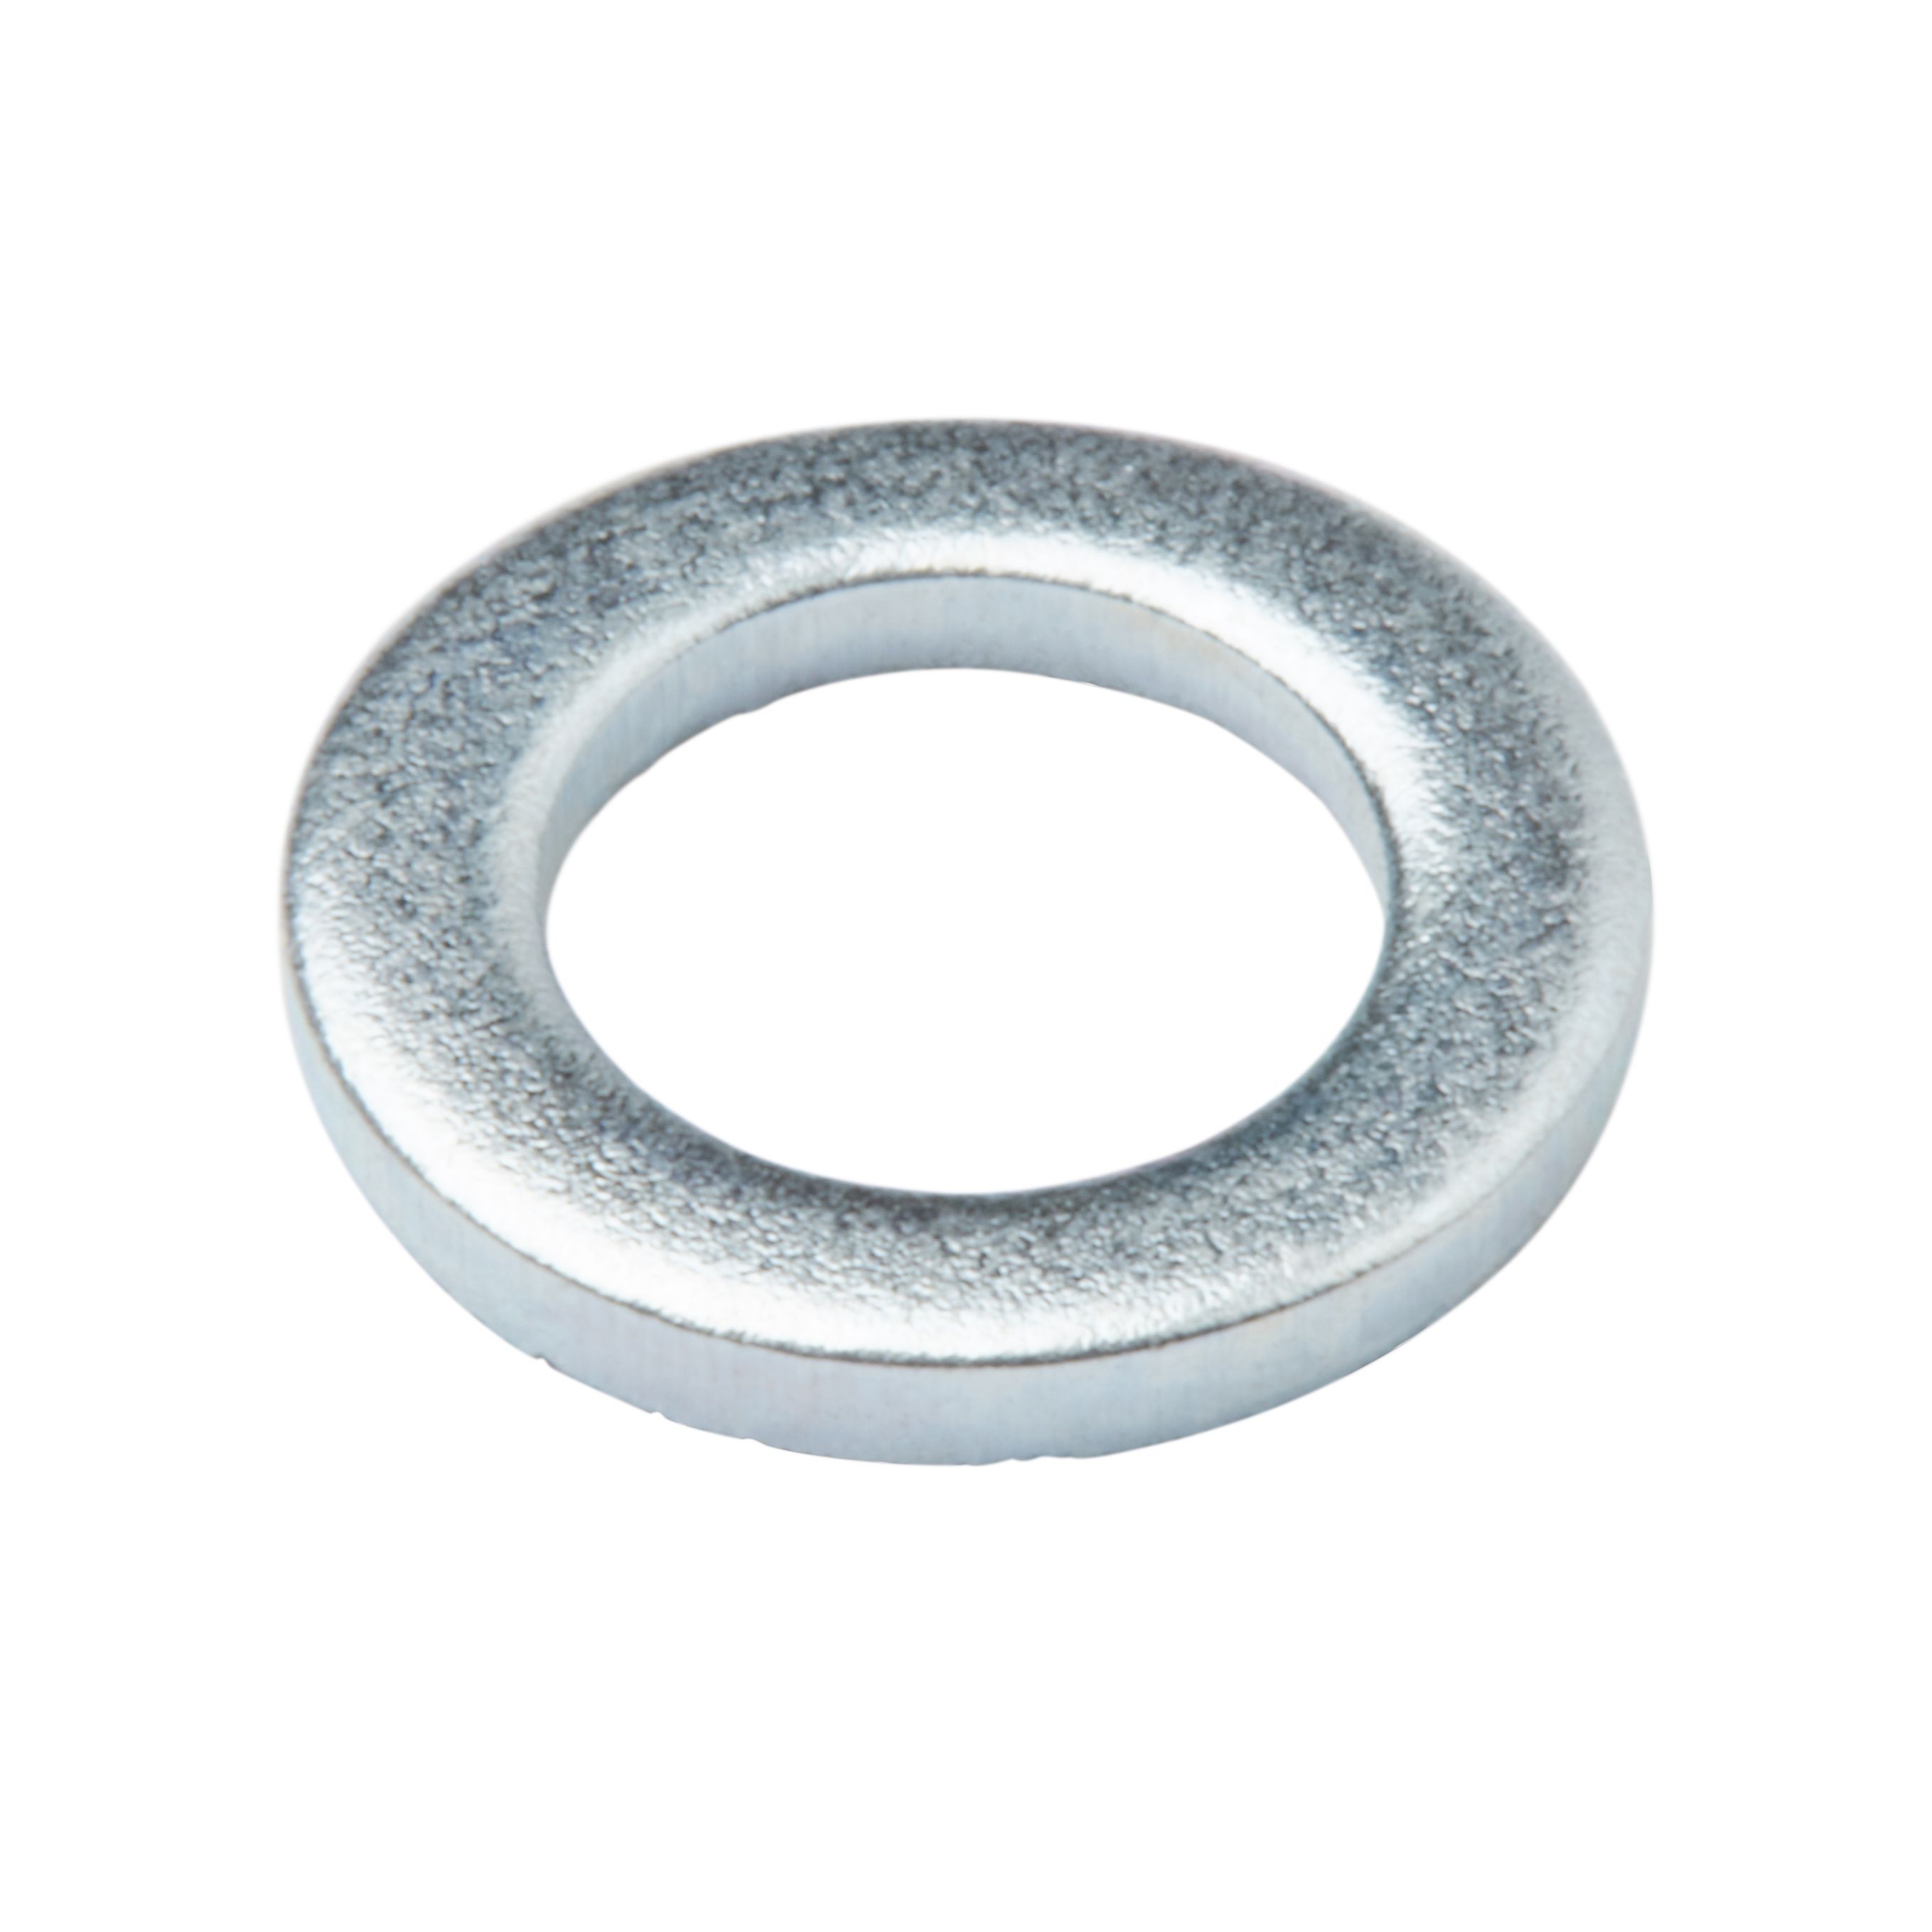 Diall M5 Carbon steel Small Flat Washer, (Dia)5mm, Pack of 20